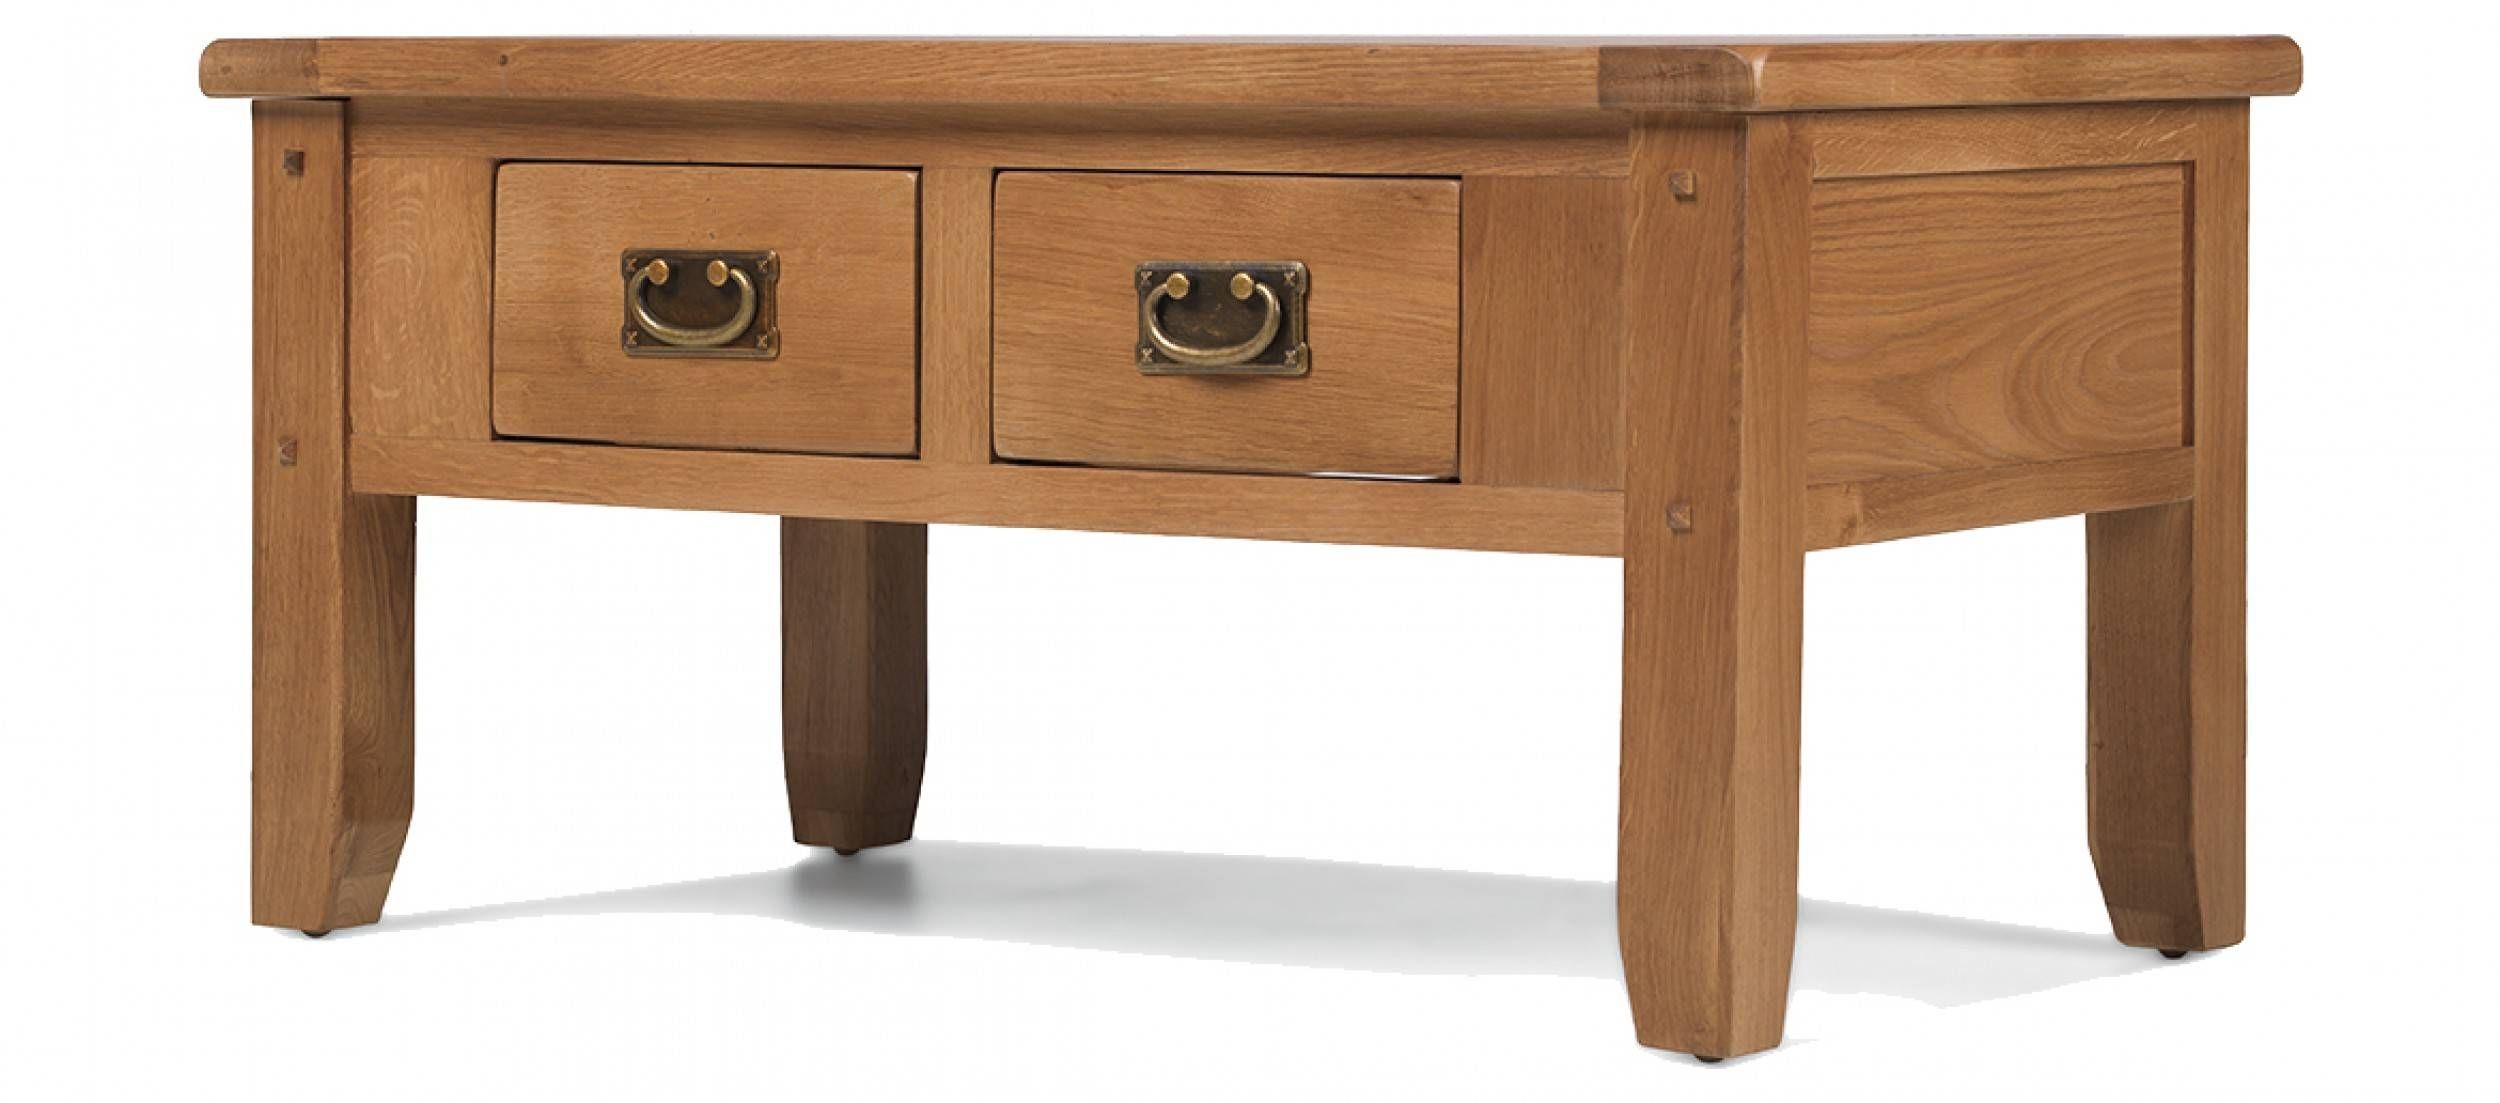 Decorating Ideas Coffee Table With Drawers – Cherry Coffee Tables Regarding Small Coffee Tables With Drawer (View 5 of 30)